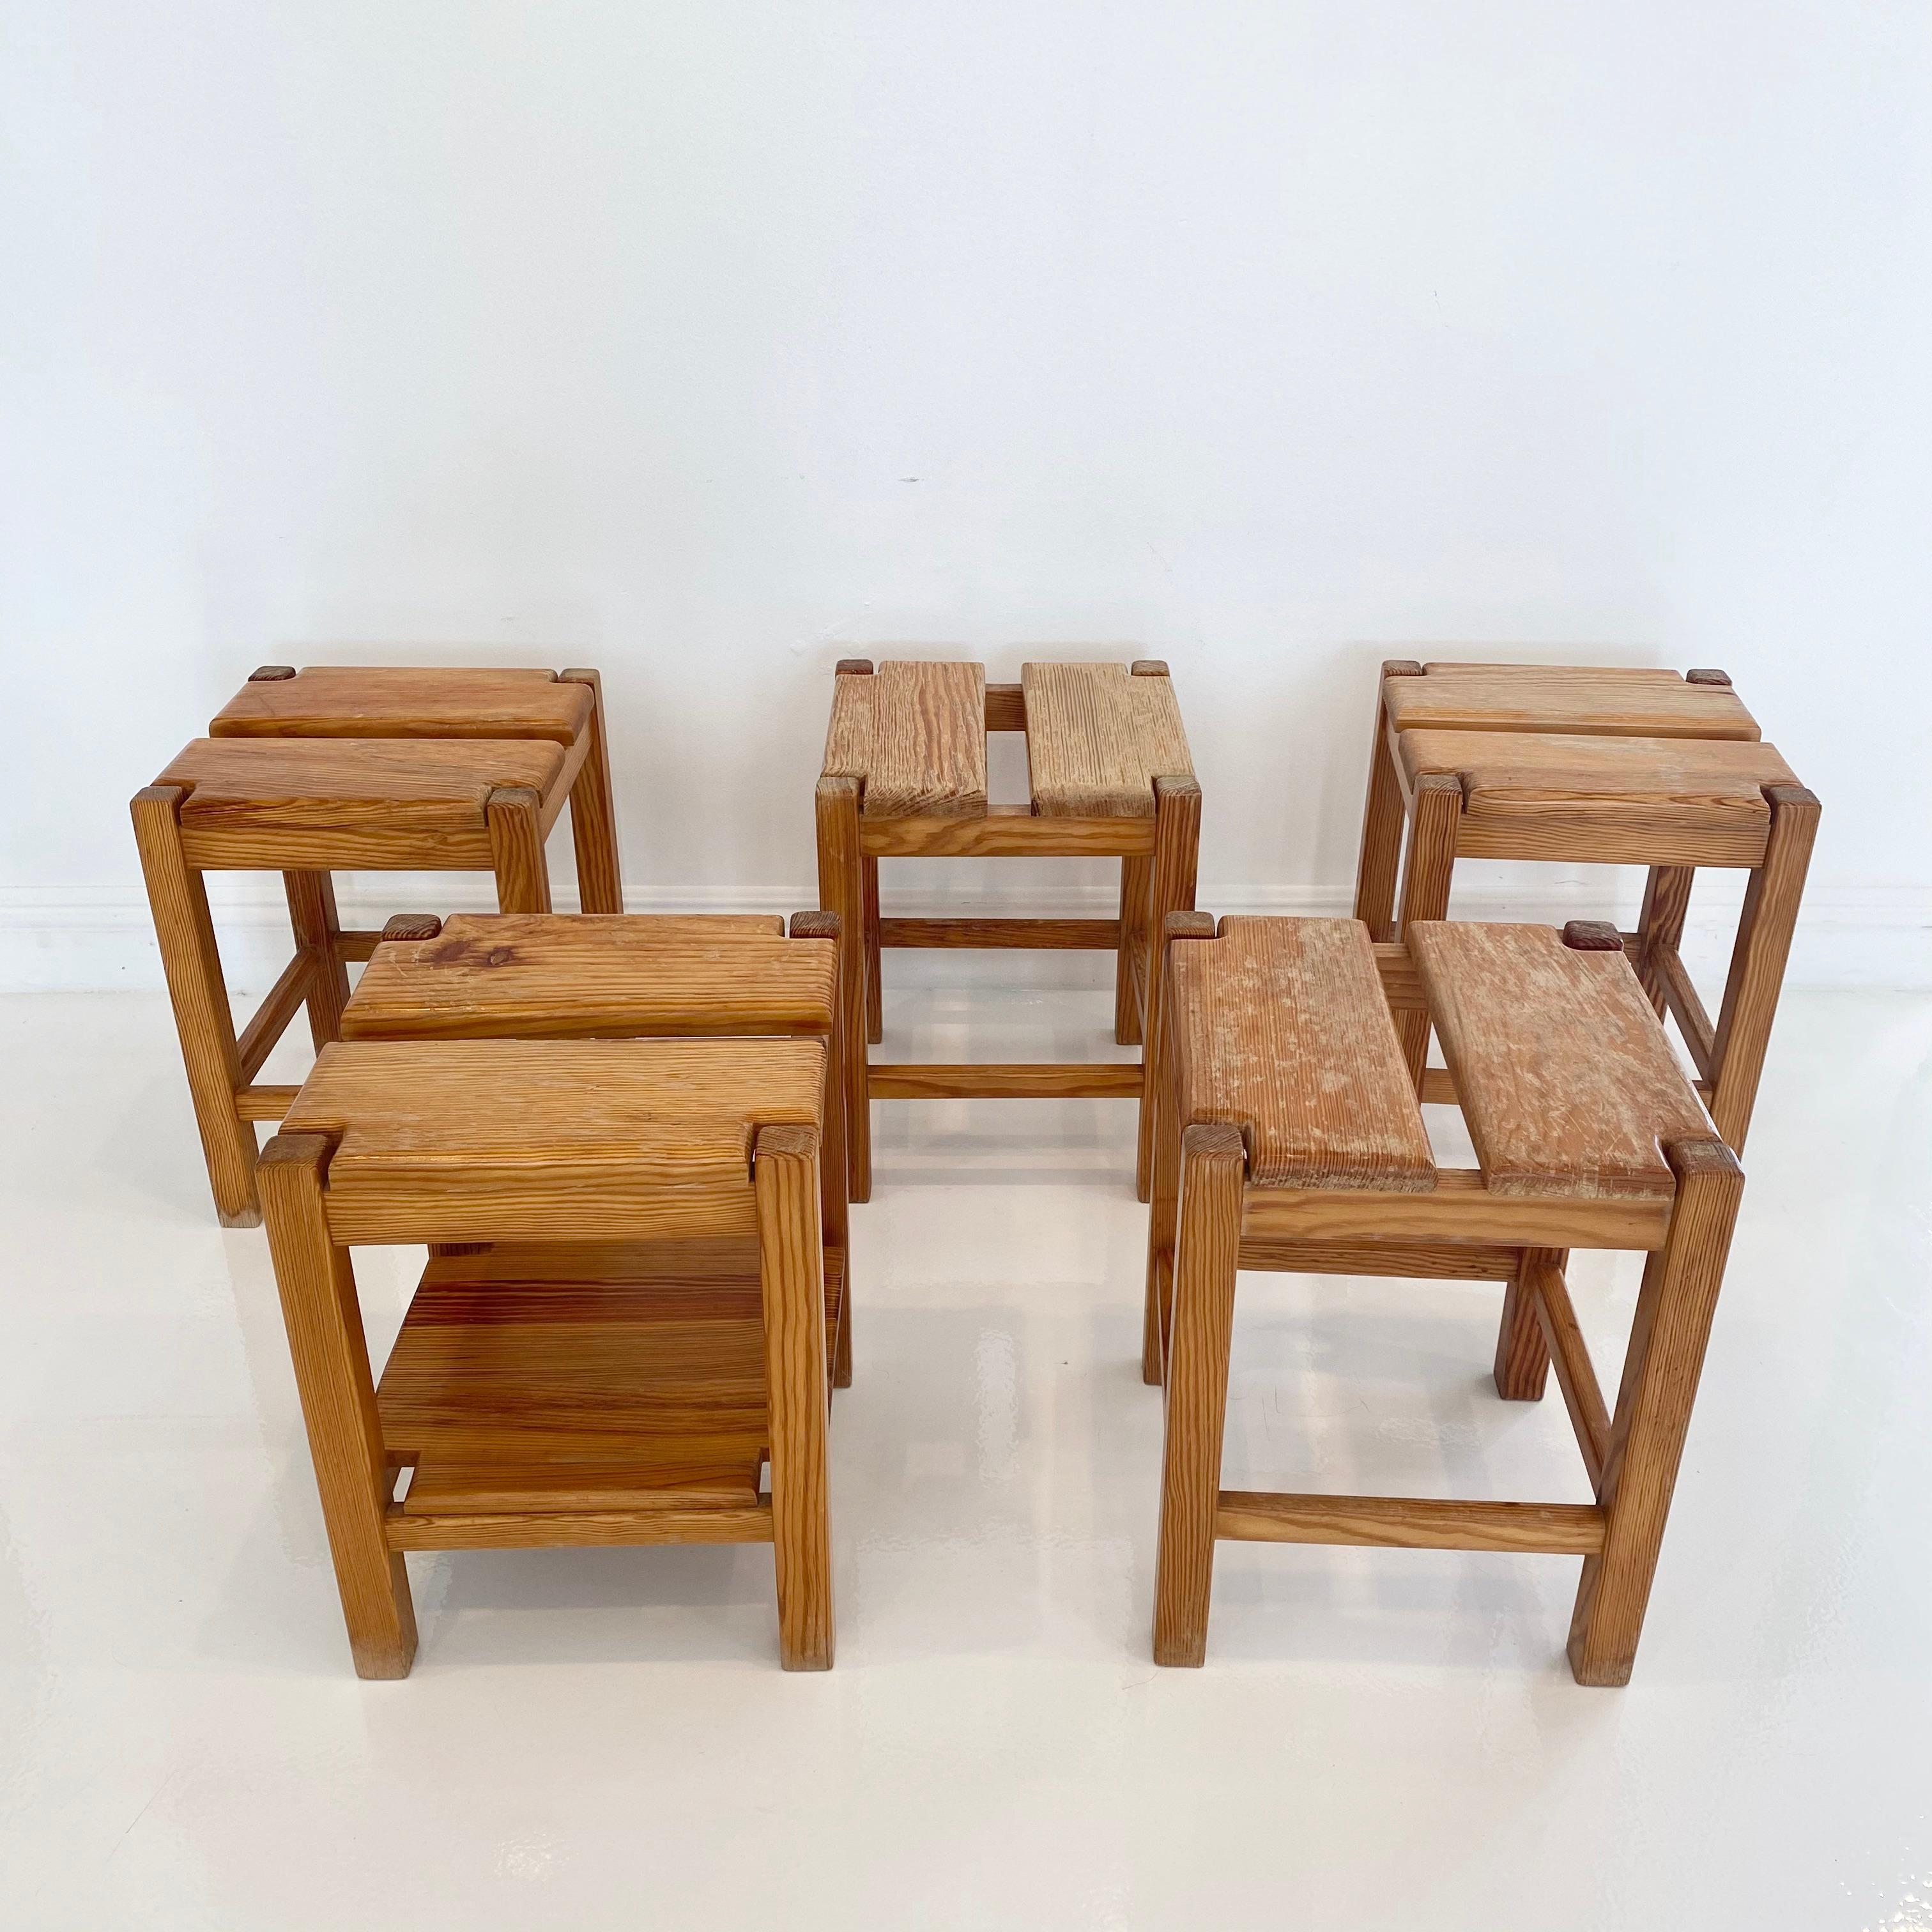 Beautiful set of five stools by French designer Pierre Gautier-Delaye (1923-2006) for Vergnères. Gautier-Delaye collaborated frequently with renowned cabinet maker Lucien Vergnères, who was also known for realizing designs by Jacques Adnet and André